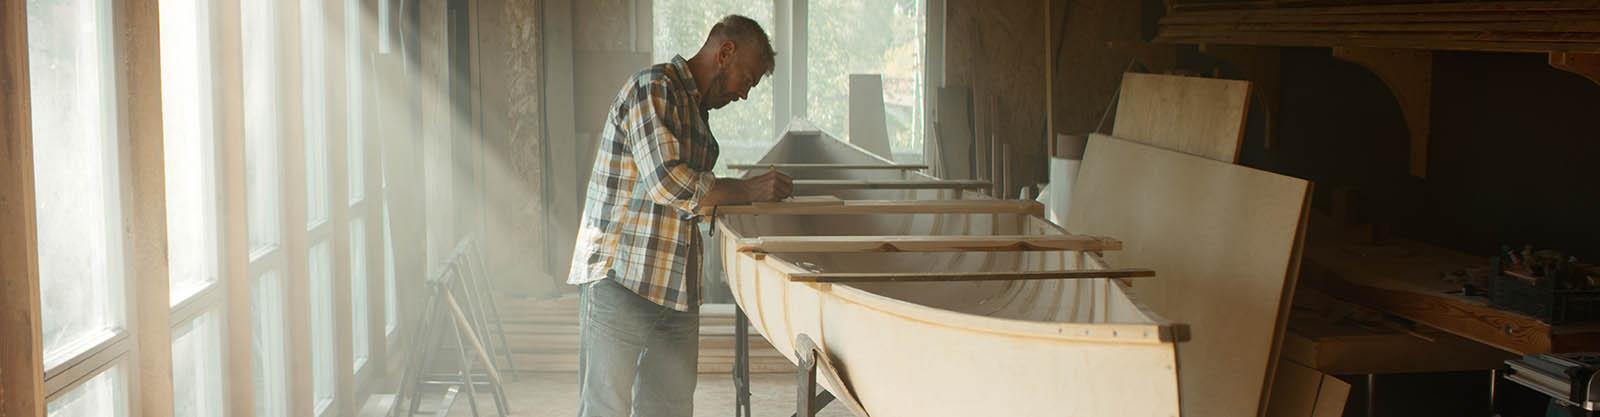 Small Business Owner building a canoe